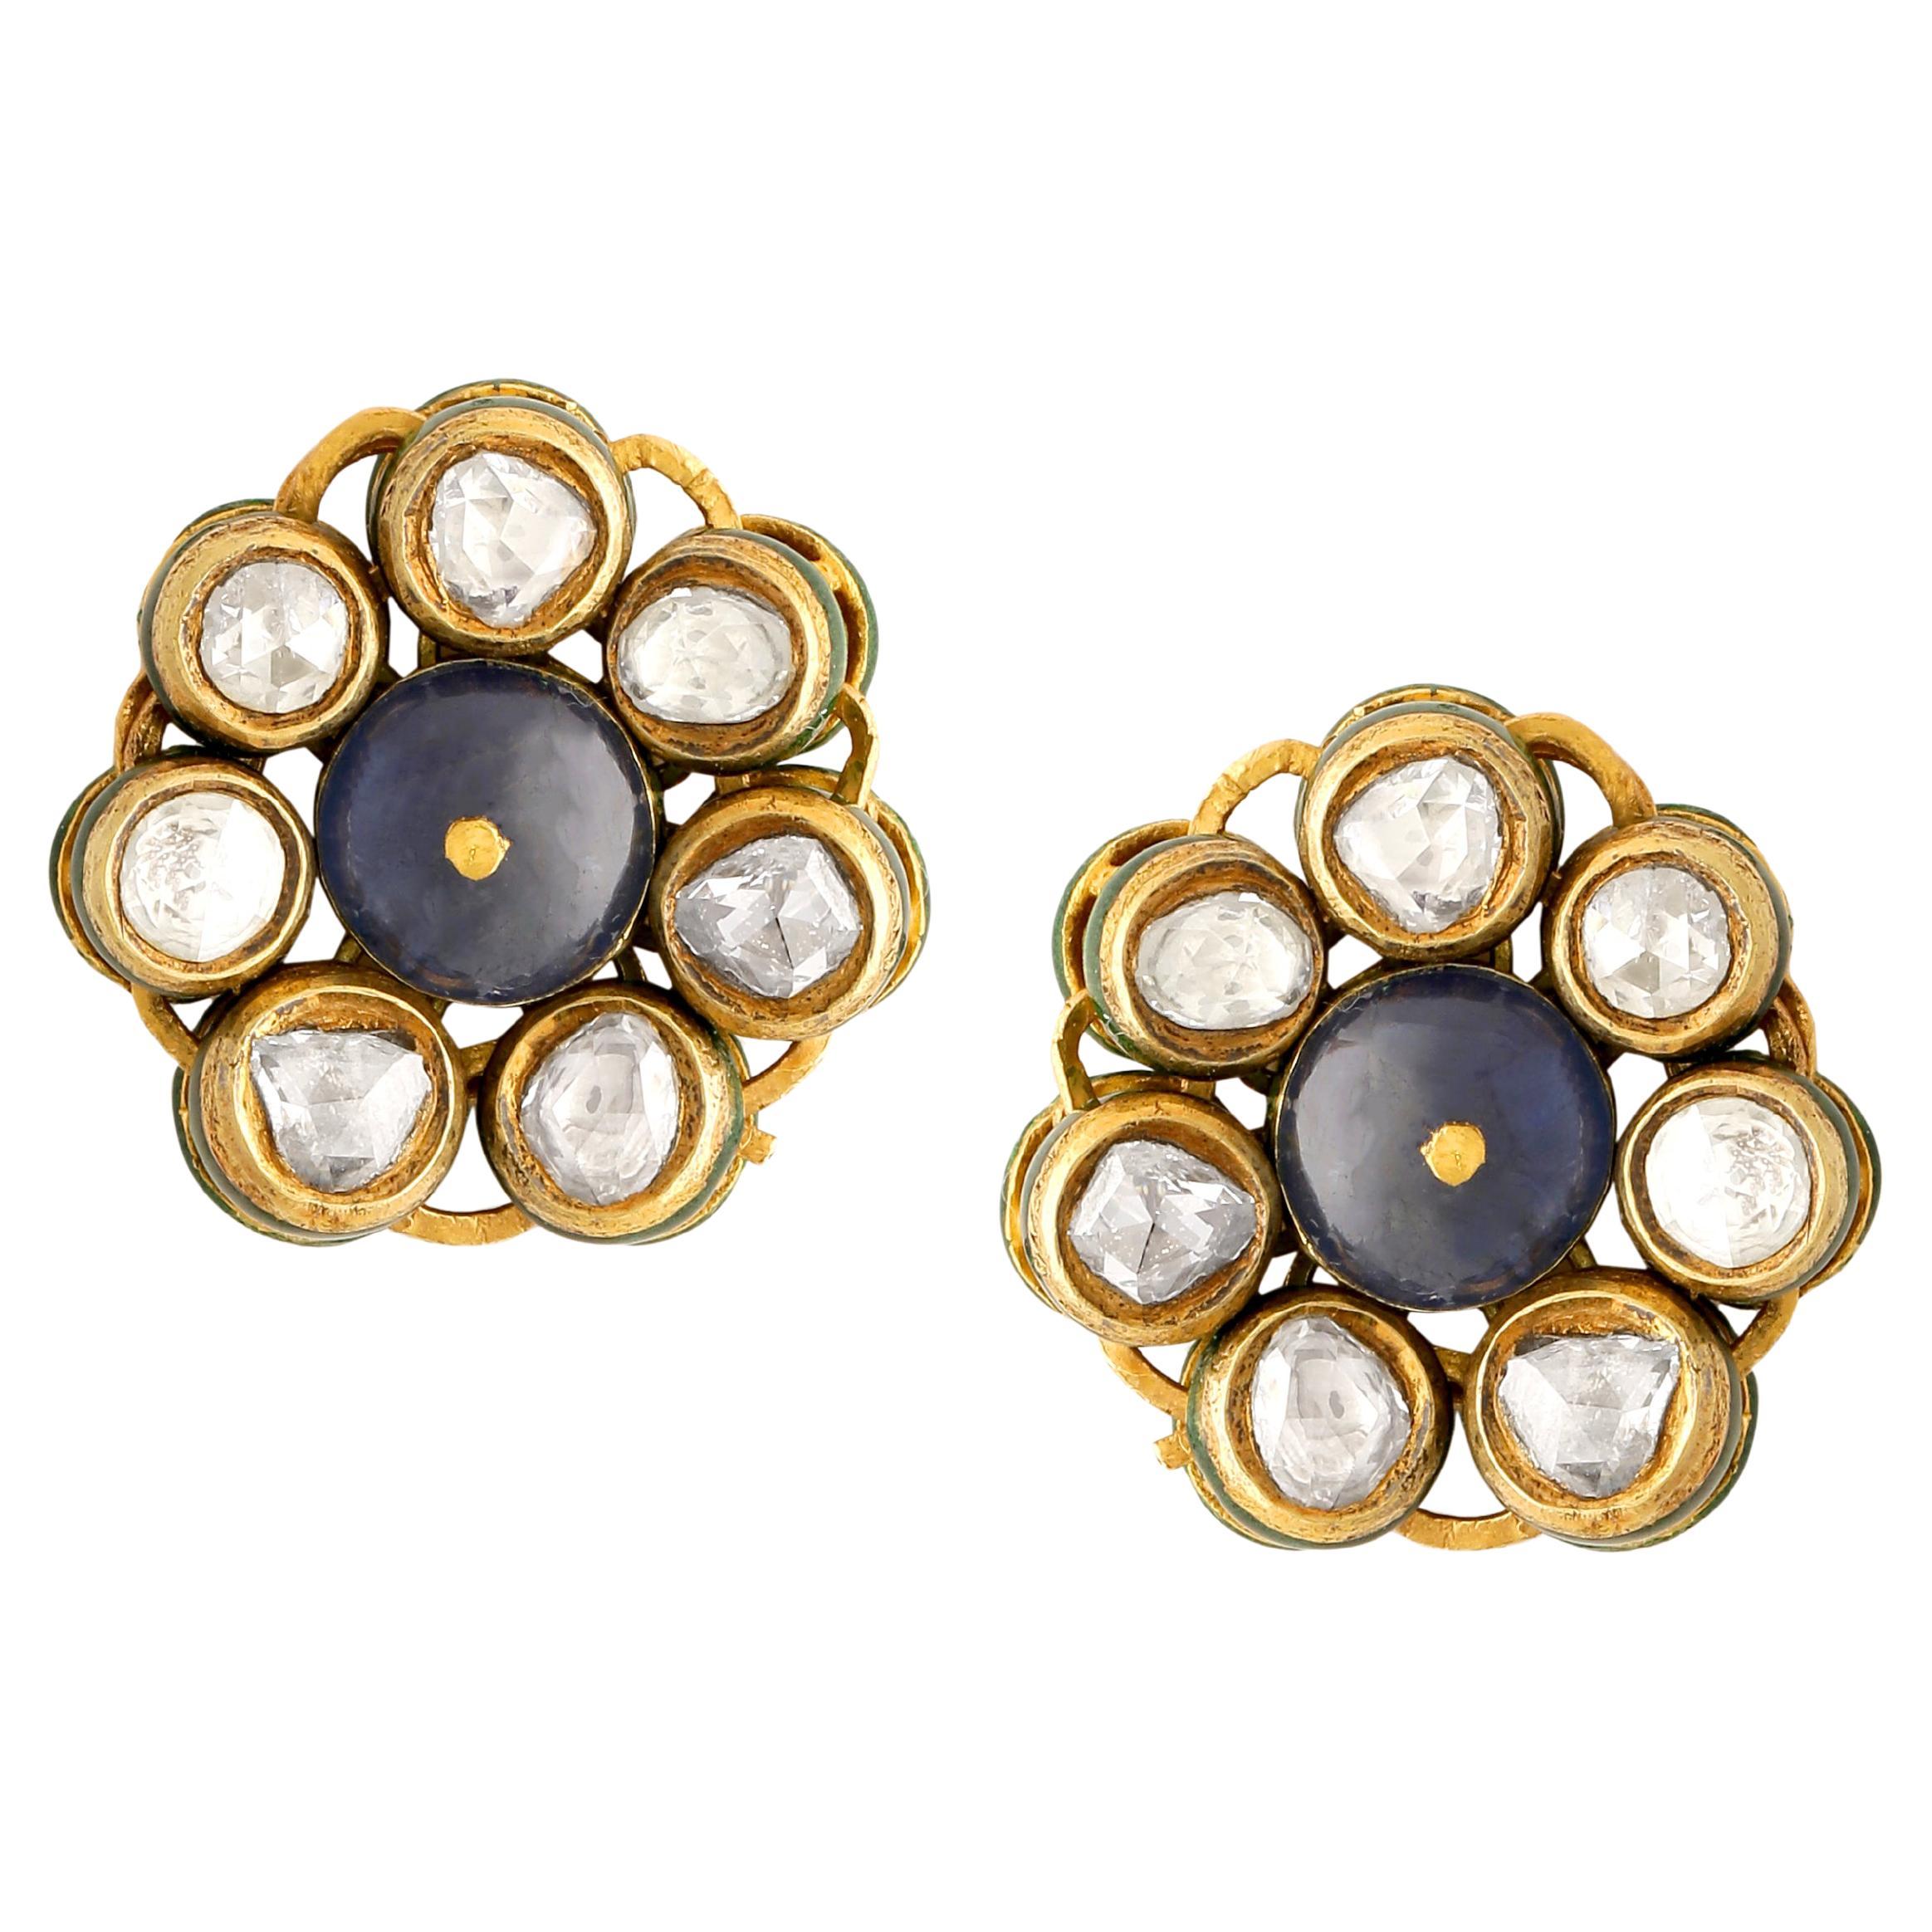 A pair of important studs with a pair of Burmese Natural Sapphire beads in the centre and Rose cut diamonds all around it. The earring is handcrafted in 18Karat yellow gold and has beautiful and intricate enamel work at the back. the enamel work is